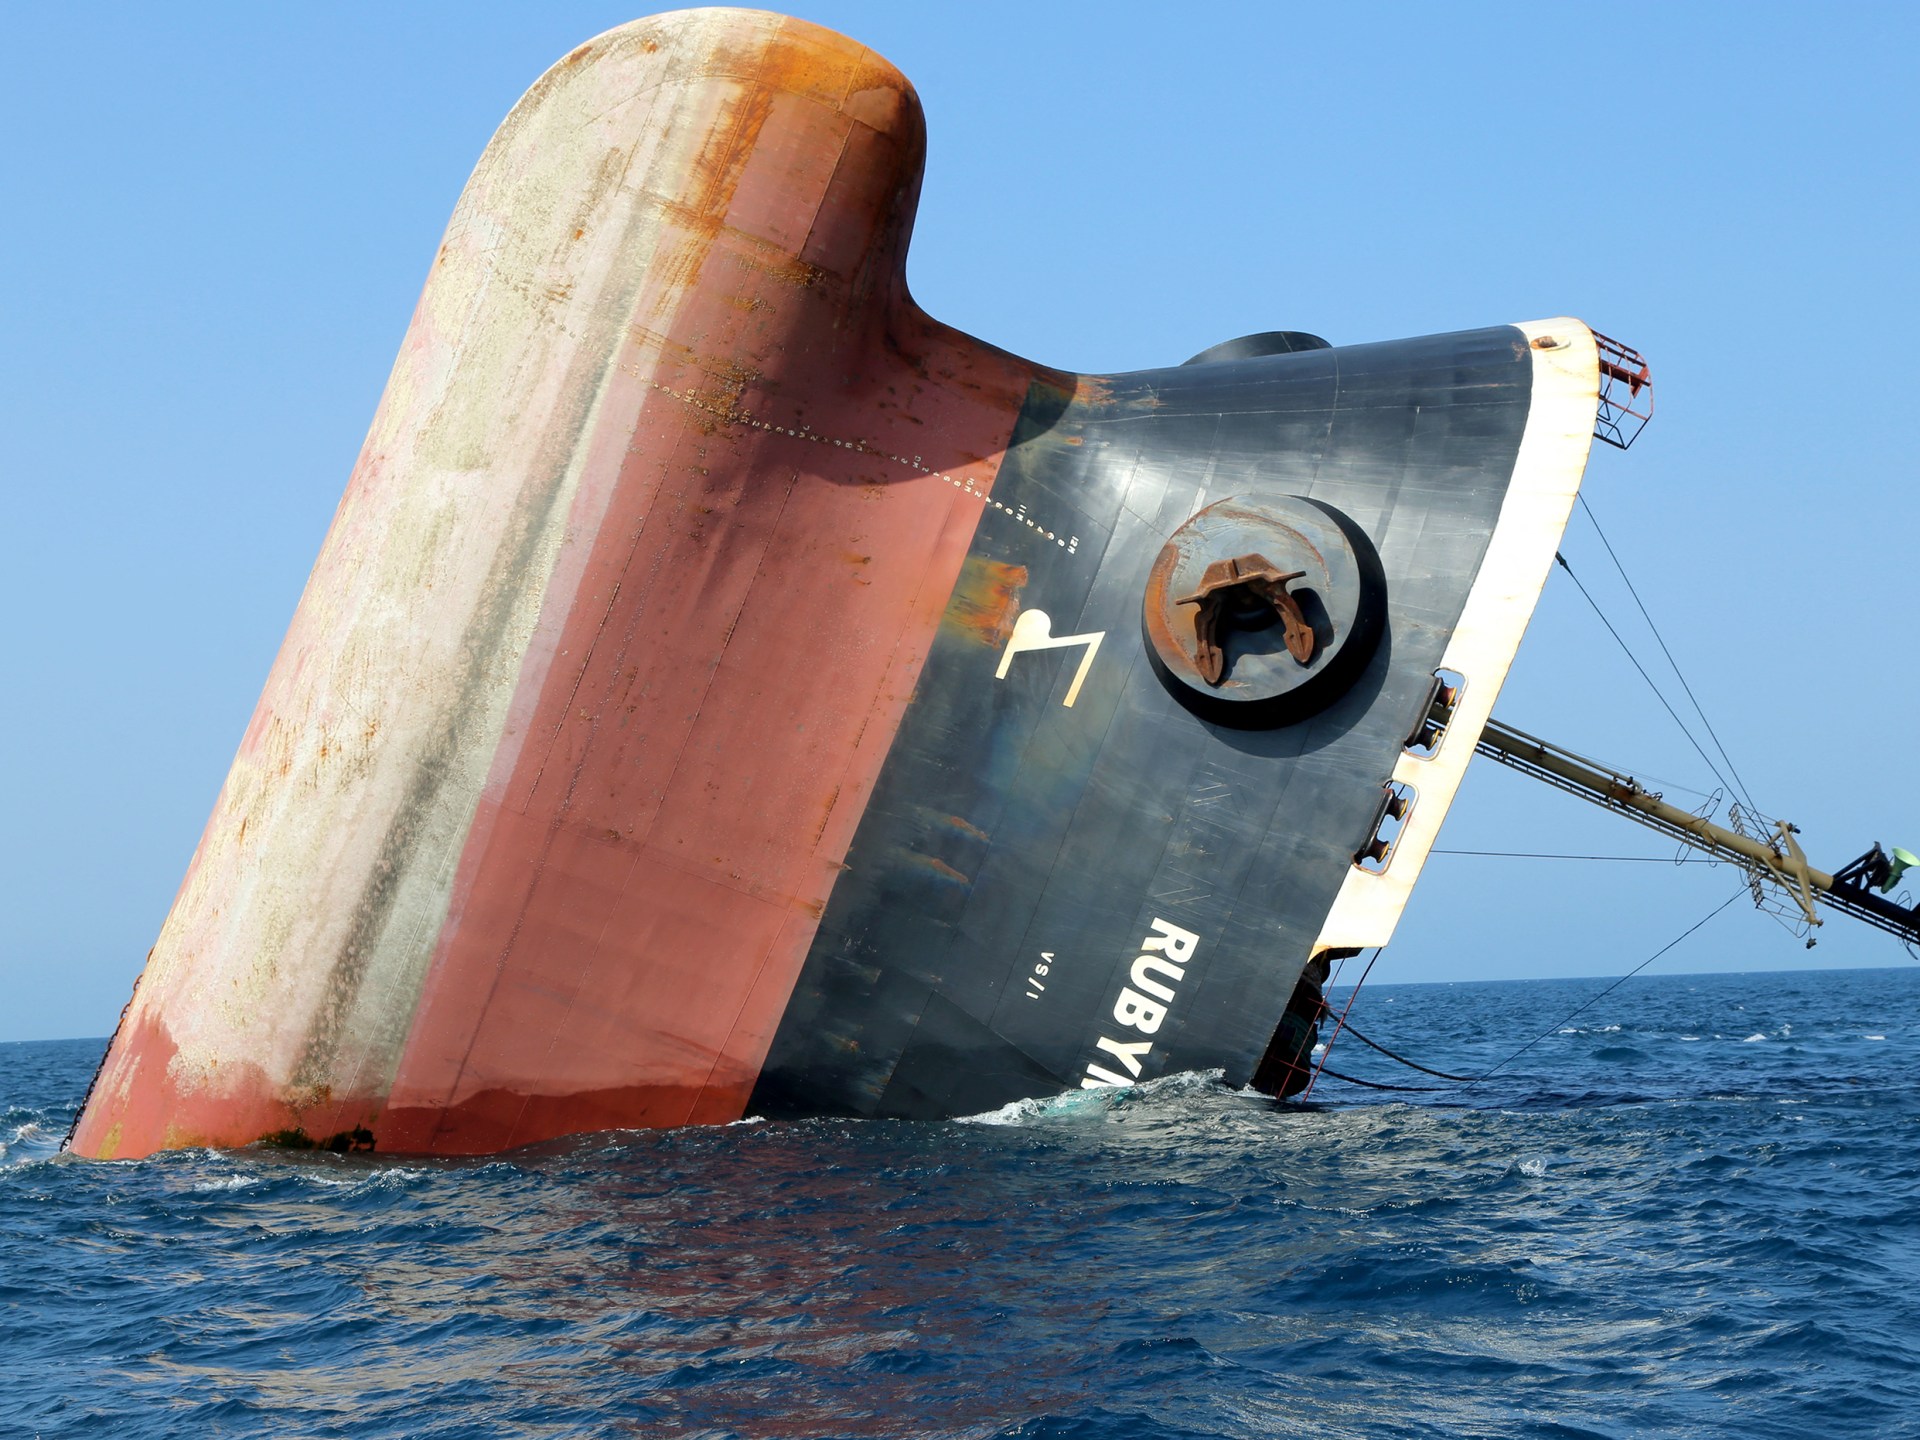 Environmental worries after ship hit in Red Sea sinks | Newsfeed